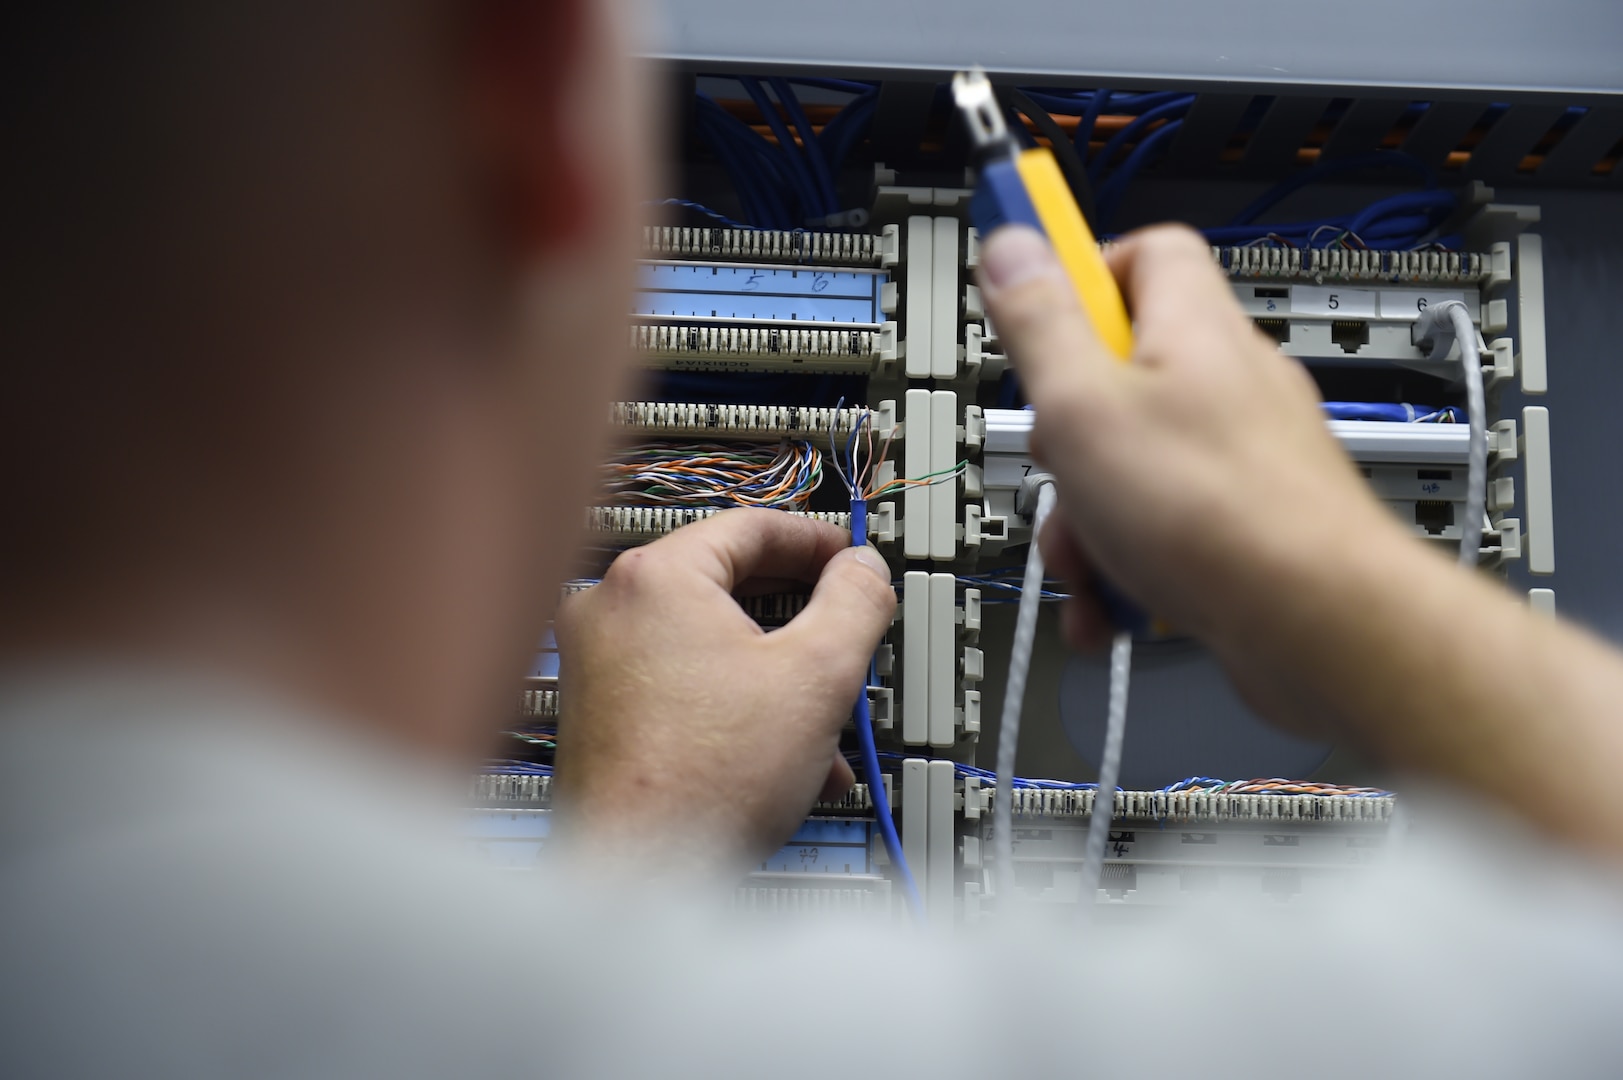 U.S. Air Force Staff Sgt. Andrew Solito, cyber transport technician, uses a punch down and tone generator to locate power for ethernet cables during Vigilant Shield 16 at 5 Wing Goose Bay, Canada, Oct. 11, 2015. From Oct. 15 to 26, 2015, approximately 700 members from the Canadian Armed Forces, the United States Air Force, the United States Navy, and the United States Air National Guard are deploying to Iqualuit, Nunavut, and 5 Wing Goose Bay, Newfoundland and Labrador for Exercise Vigilant Shield 16. (U.S. Air Force photo by Senior Airman Jasmonet Jackson/Released)